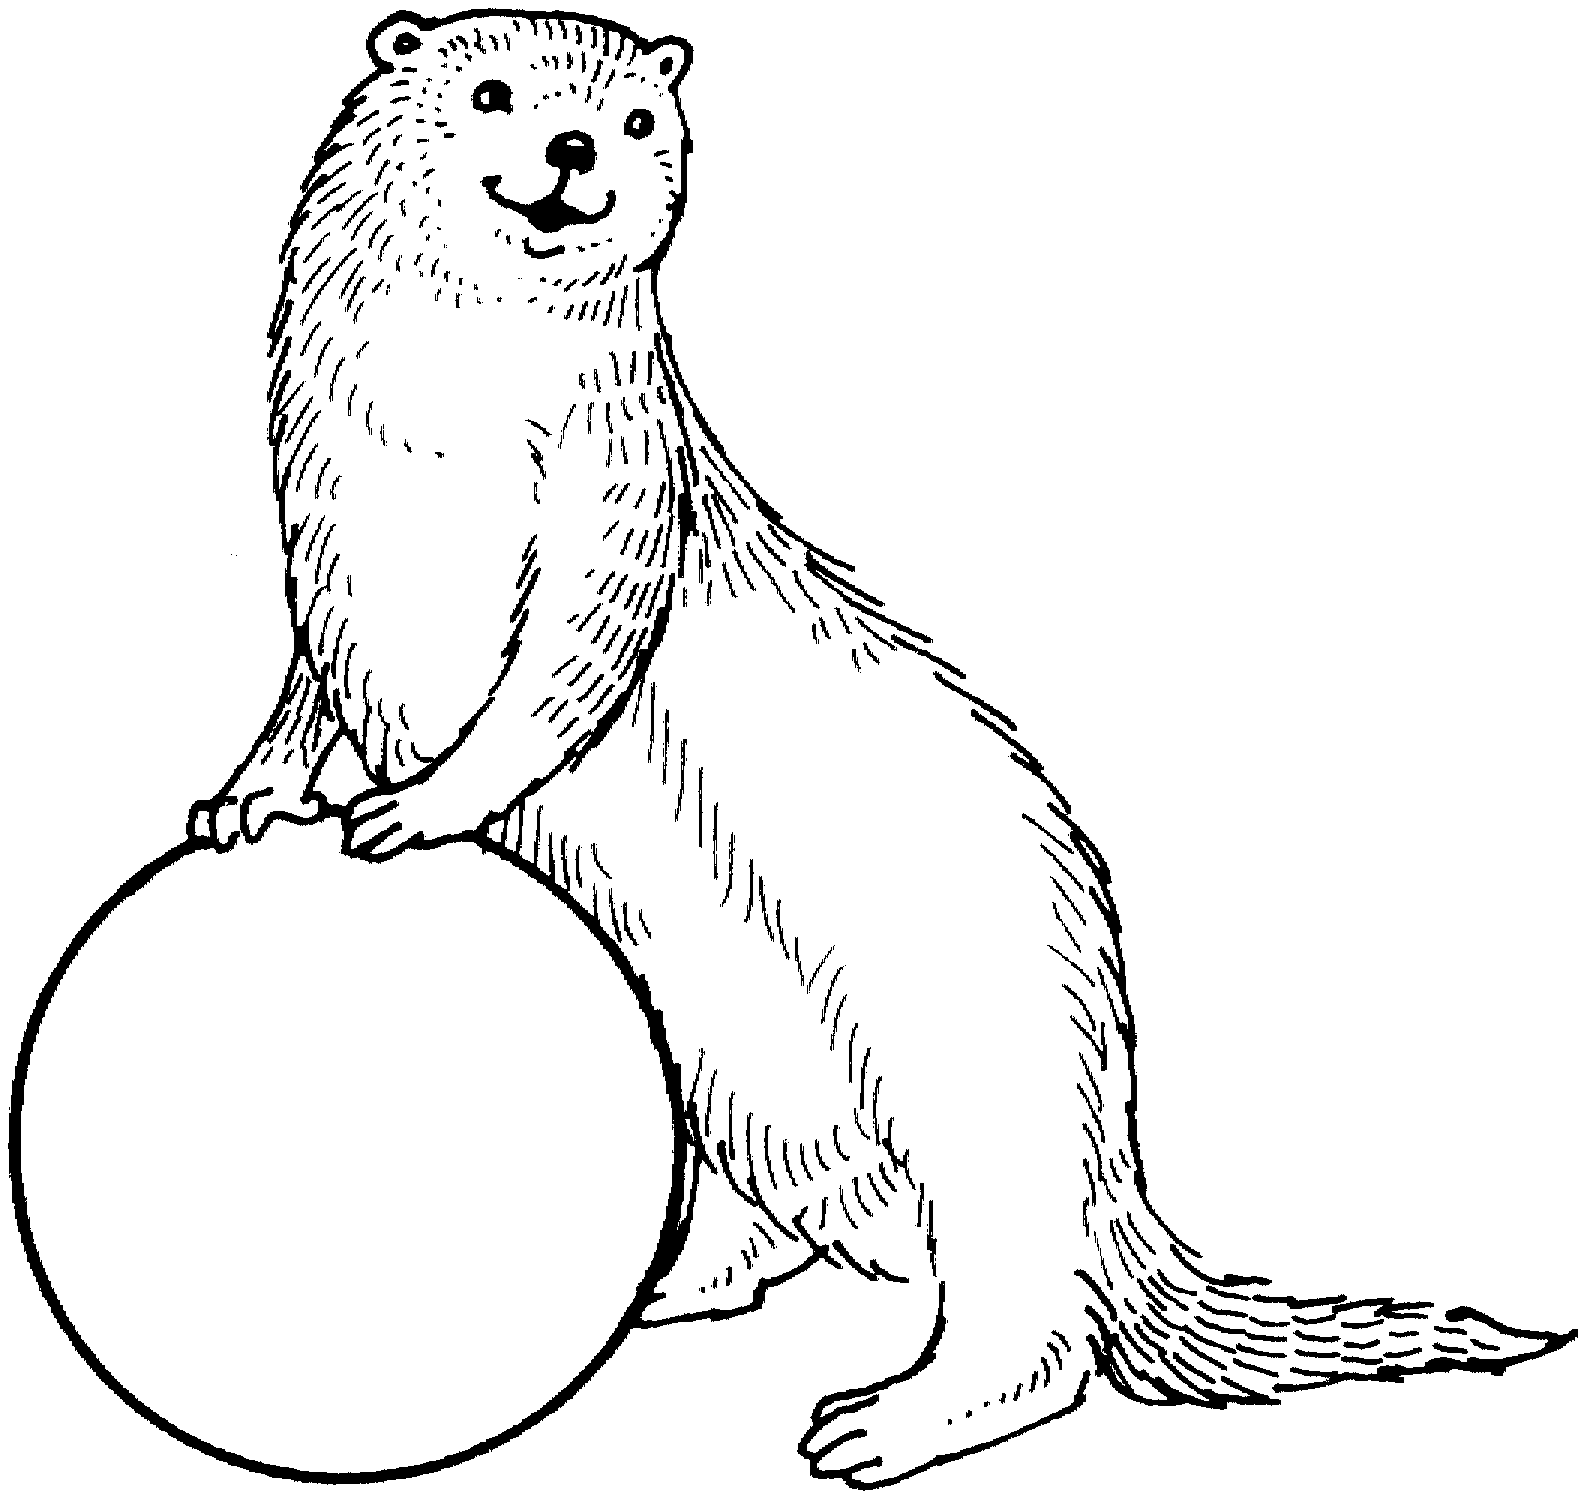 sea otter coloring pages otter this website has all kinds of awesome coloring pages otter sea coloring 